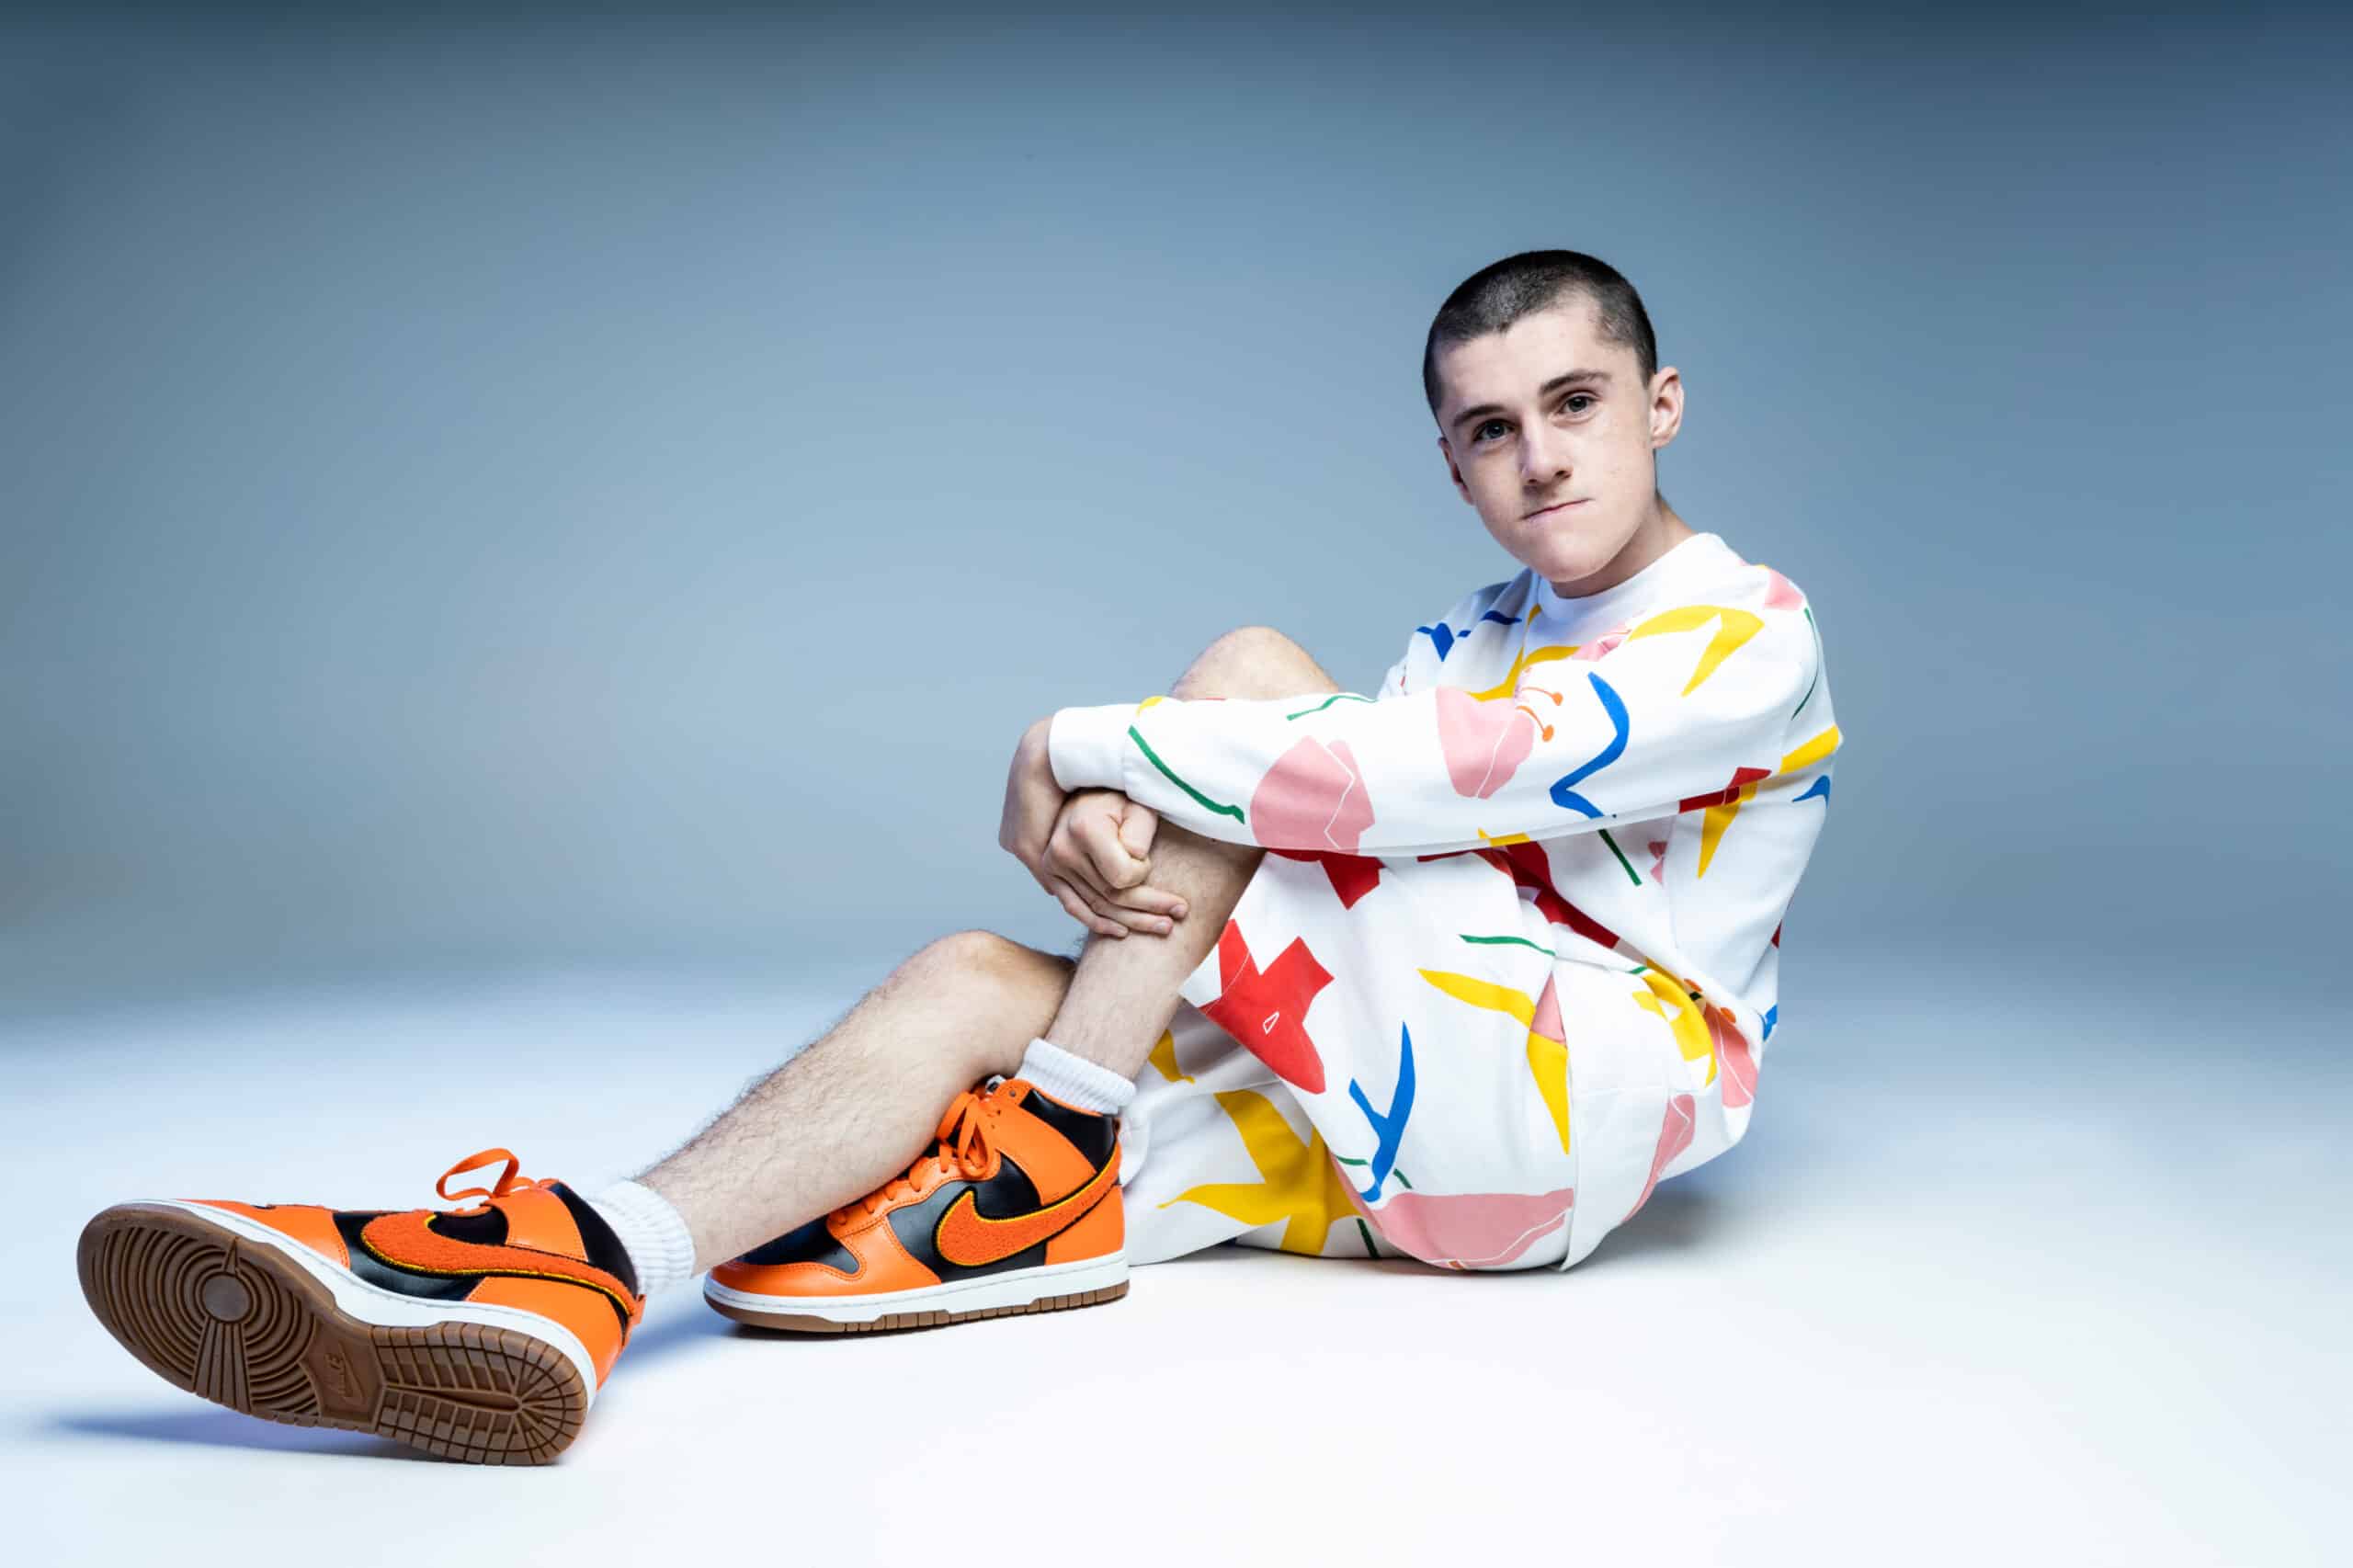 DJ Cooper sitting on the floor with arms folded over legs wearing a bright outfit.